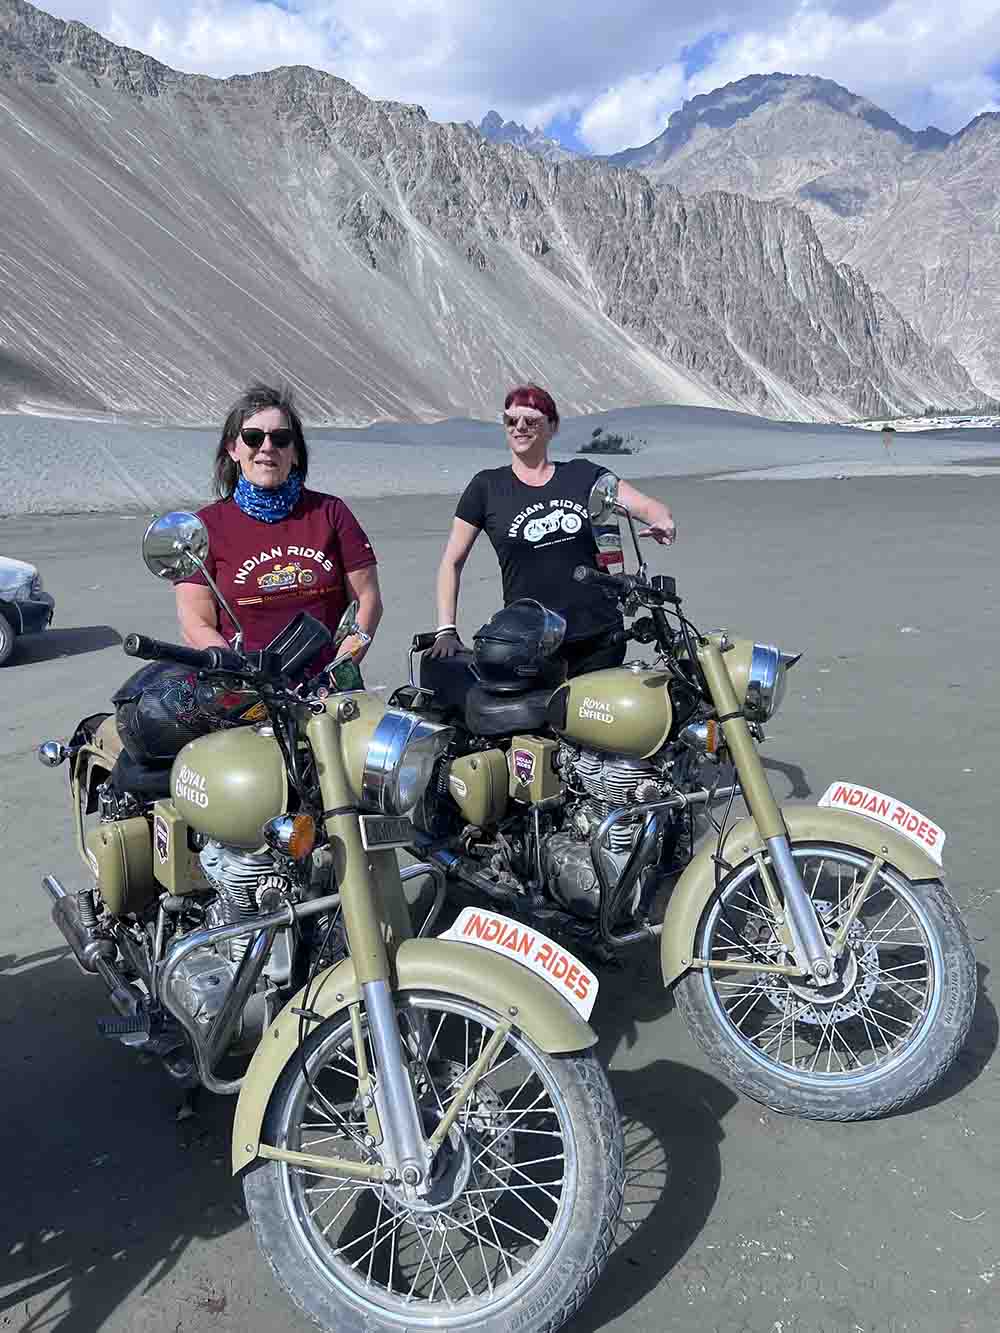 Girls motorcycle adventure in Himalaya with IndianRides